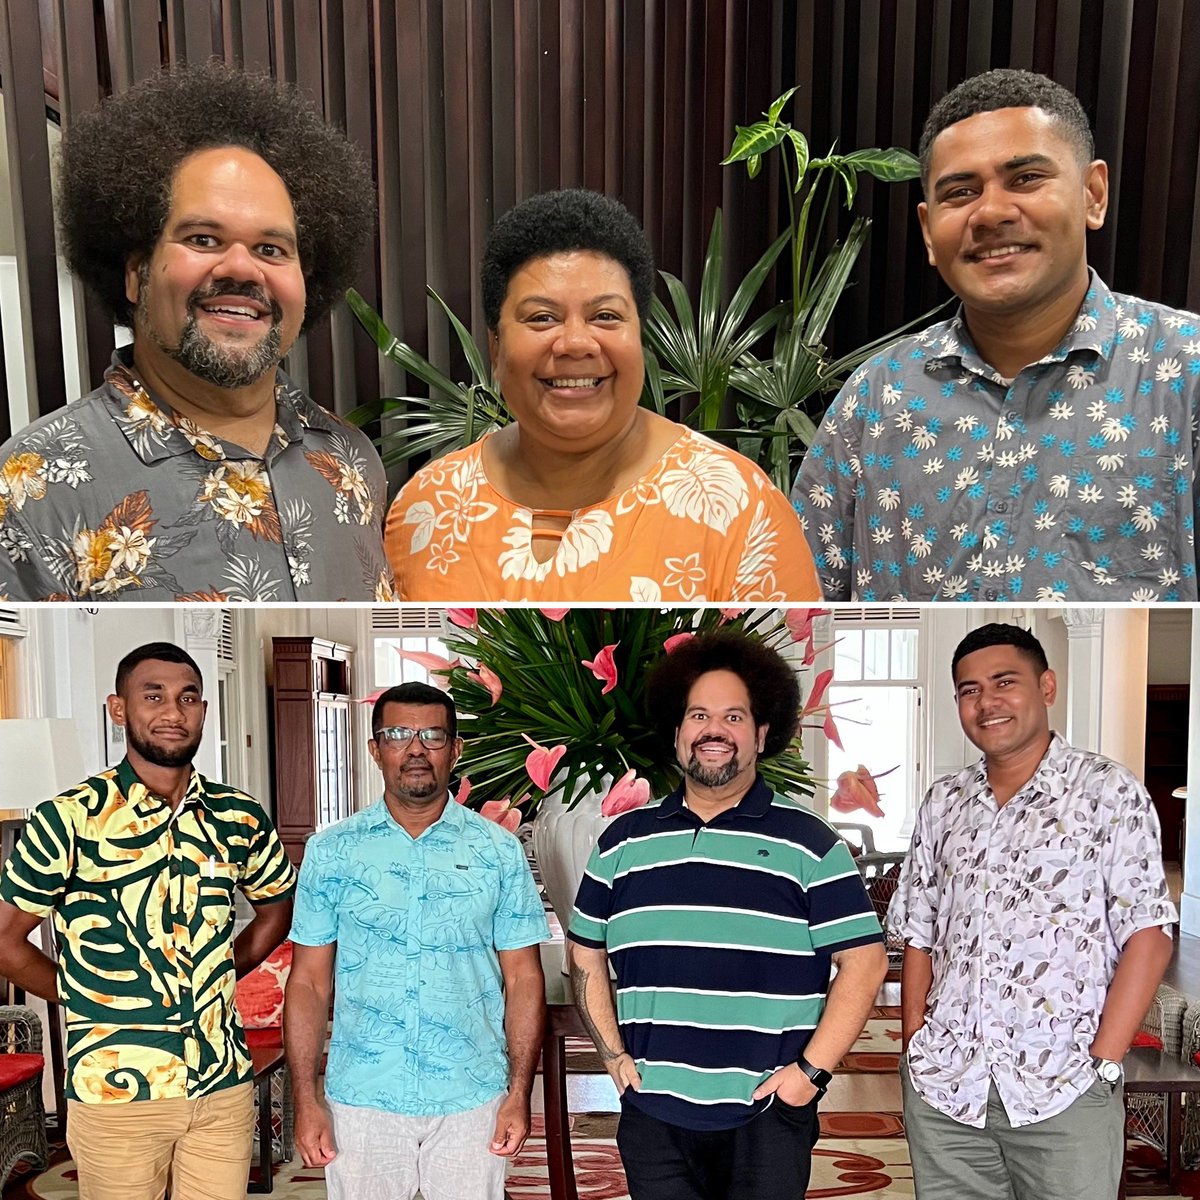 SO LOVELY to meet colleagues, students and community reps during the week in Fiji ❤️ Greatly looking forward to our ongoing collabs & convos with @UNICEF @UniSouthPacific @ForumSEC @PSGDN1 👌🏽☀️🏝️@USyd_SSESW @ArtSS_Sydney @Sydney_Uni 👍🏽😁🙌🏽 #Talanoa #BluePacific #Regionalism